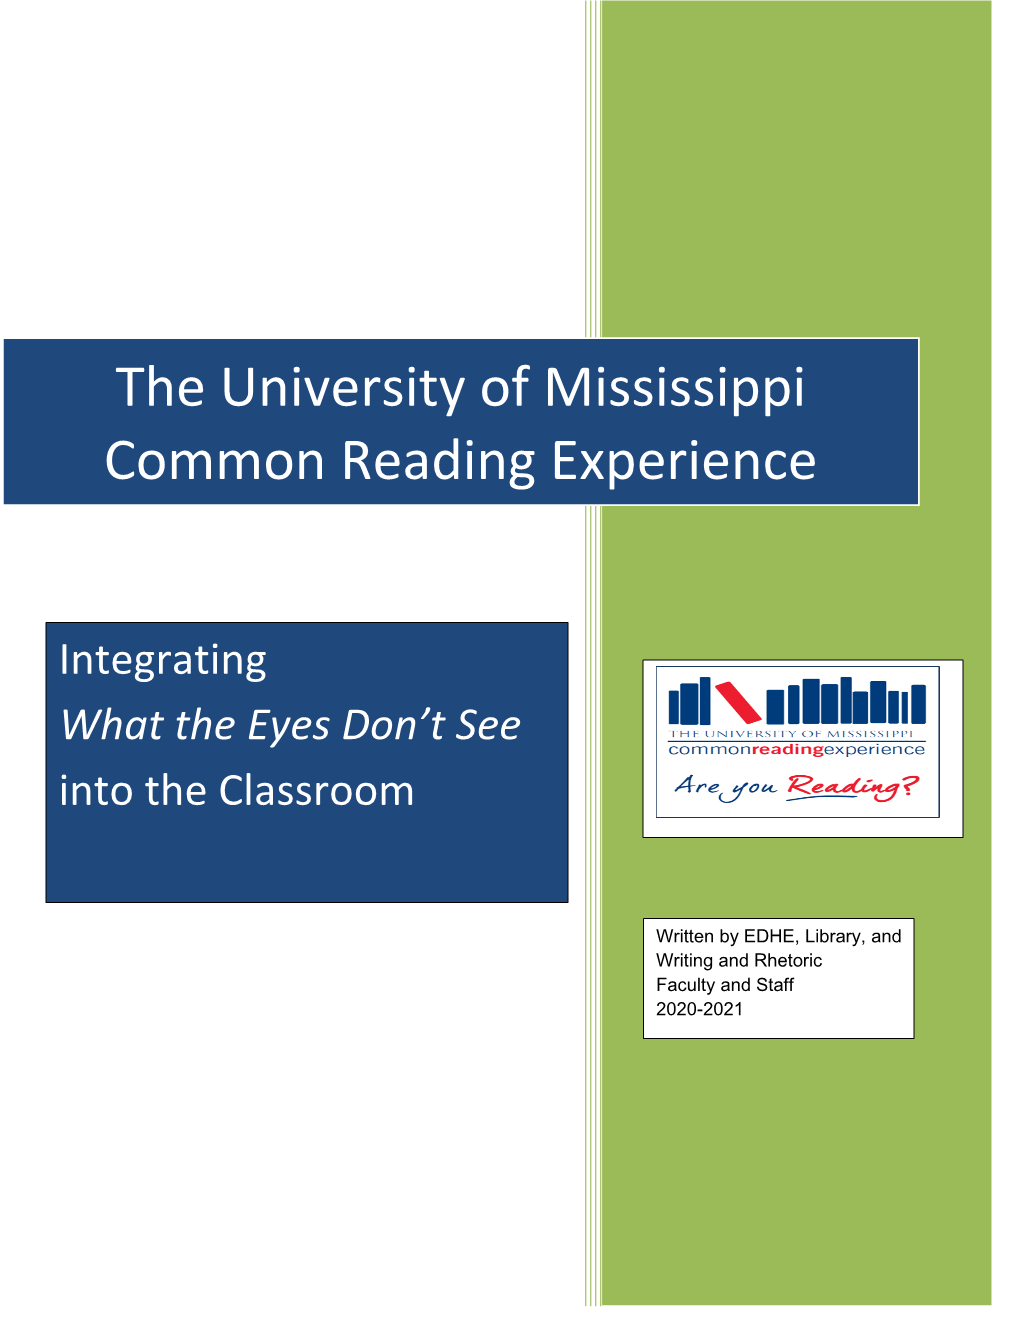 The University of Mississippi Common Reading Experience